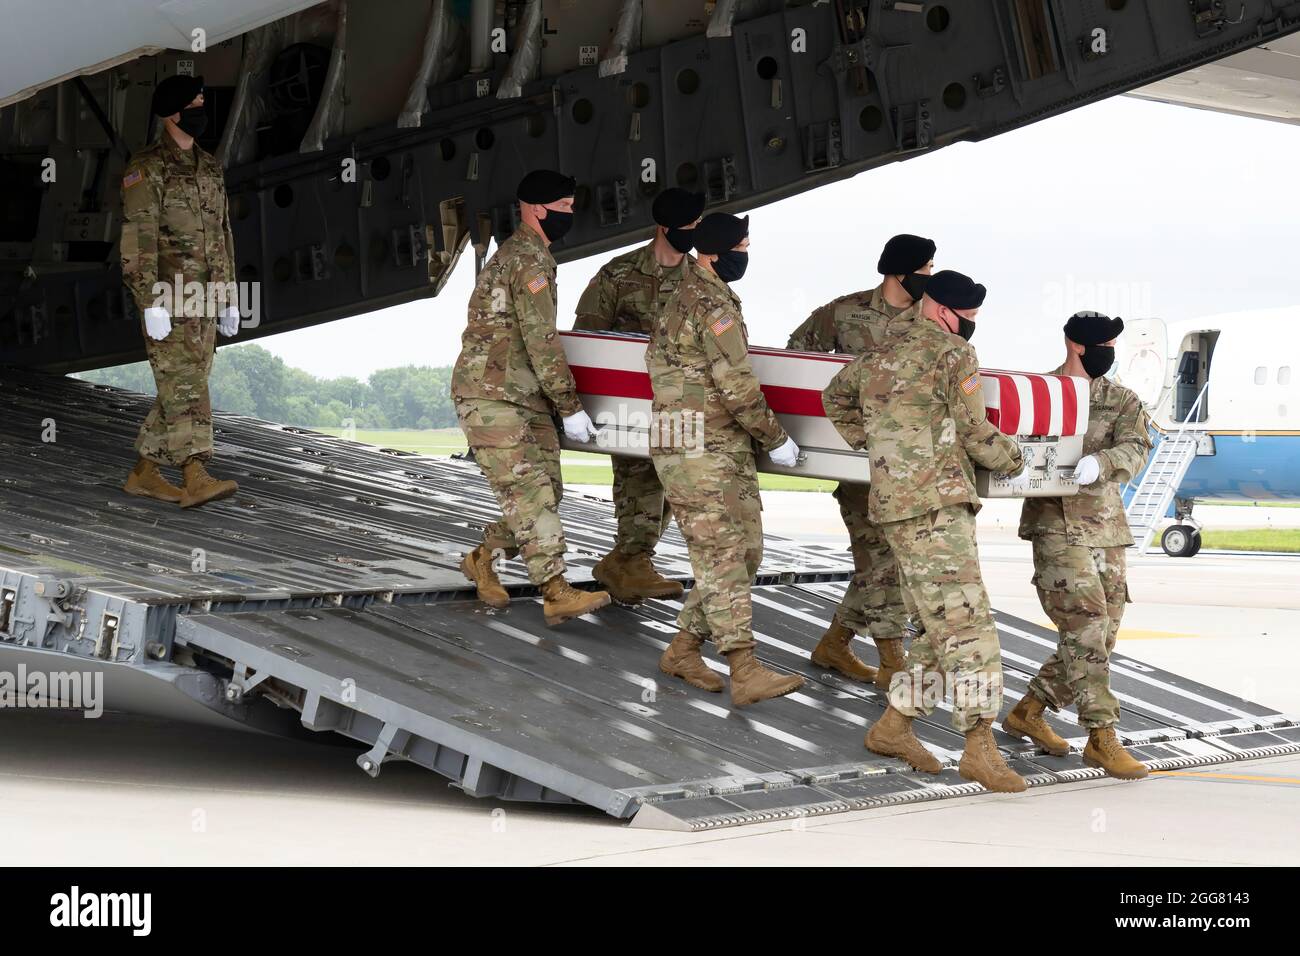 A U.S. Army carry team transfers the remains of Army Staff Sgt. Ryan C. Knauss of Corryton, Tennessee, Aug. 29, 2021 at Dover Air Force Base, Delaware. Knauss was assigned to the 9th Psychological Operations Battalion, 8th Psychological Operations Group, Ft. Bragg, North Carolina. (U.S. Air Force photo by Jason Minto) Stock Photo